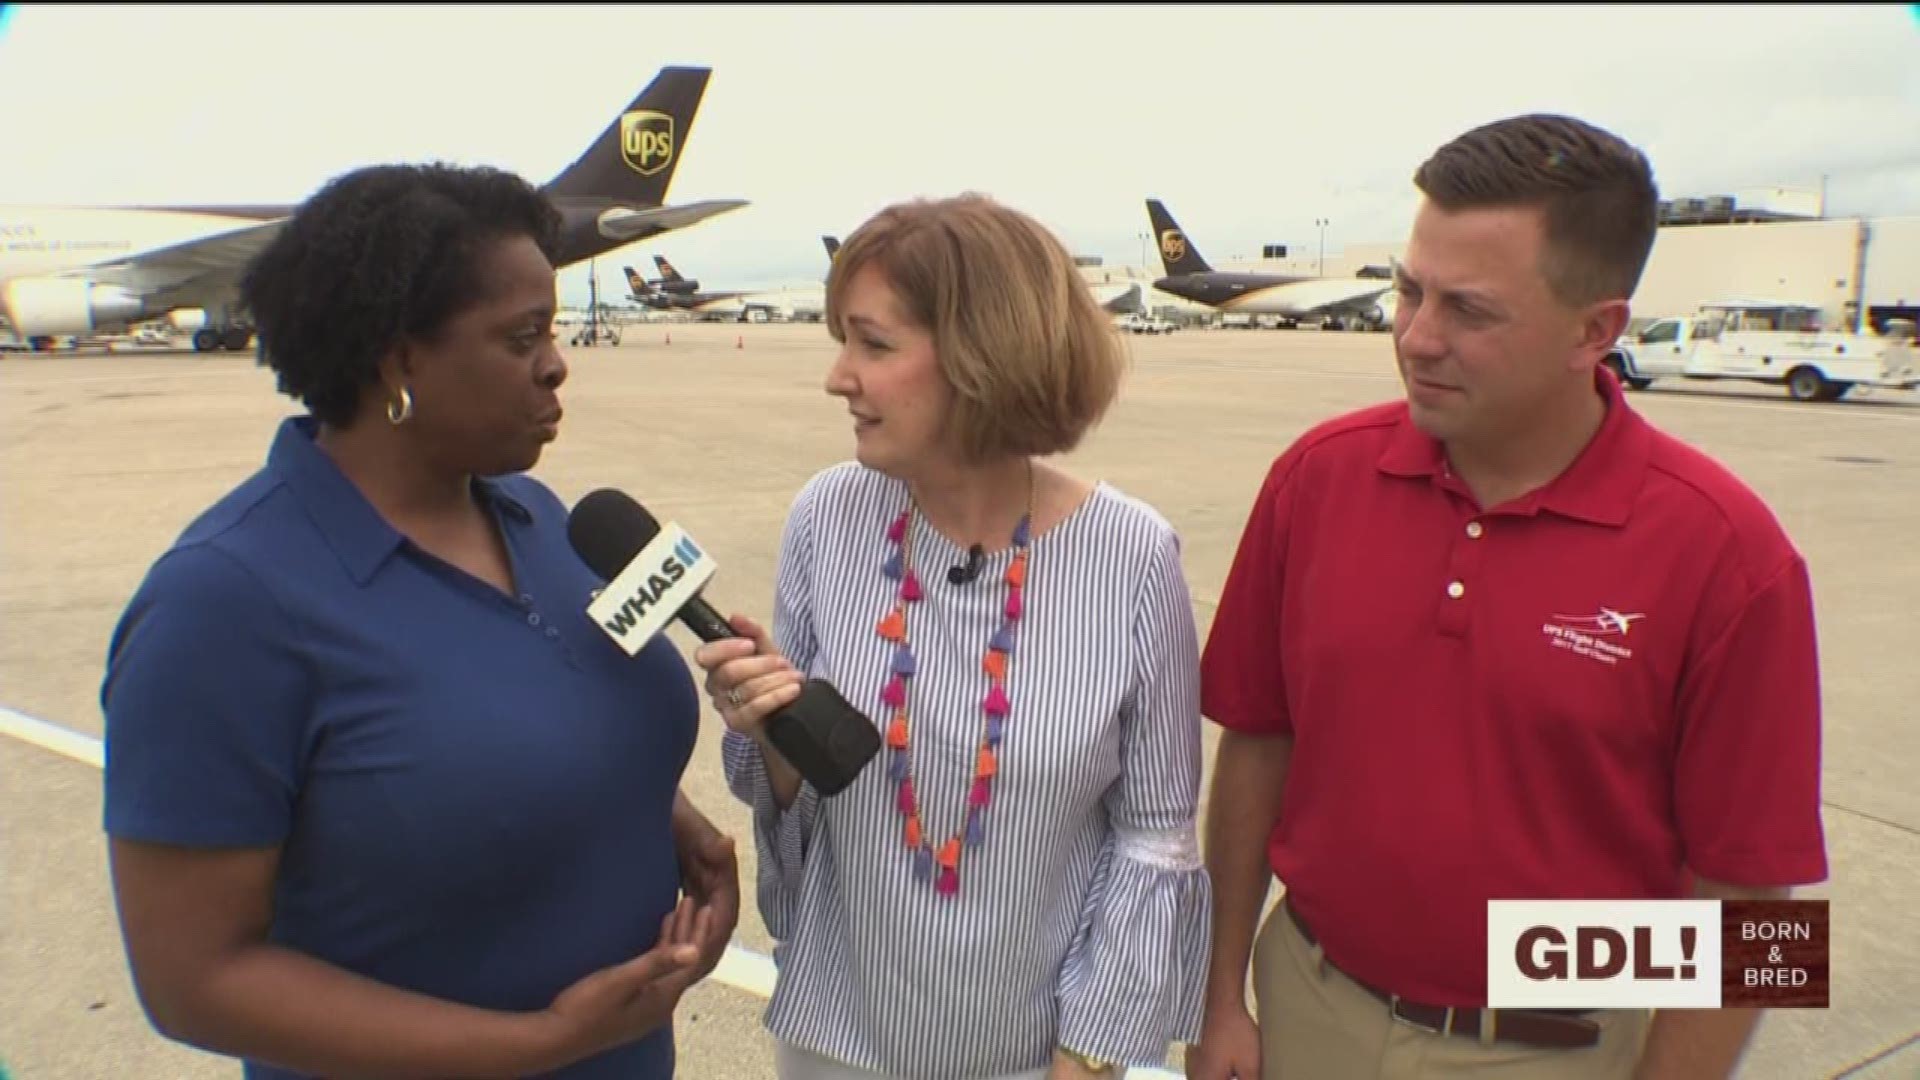 Anne Doyle gets a behind the scenes look at the UPS Worldport.